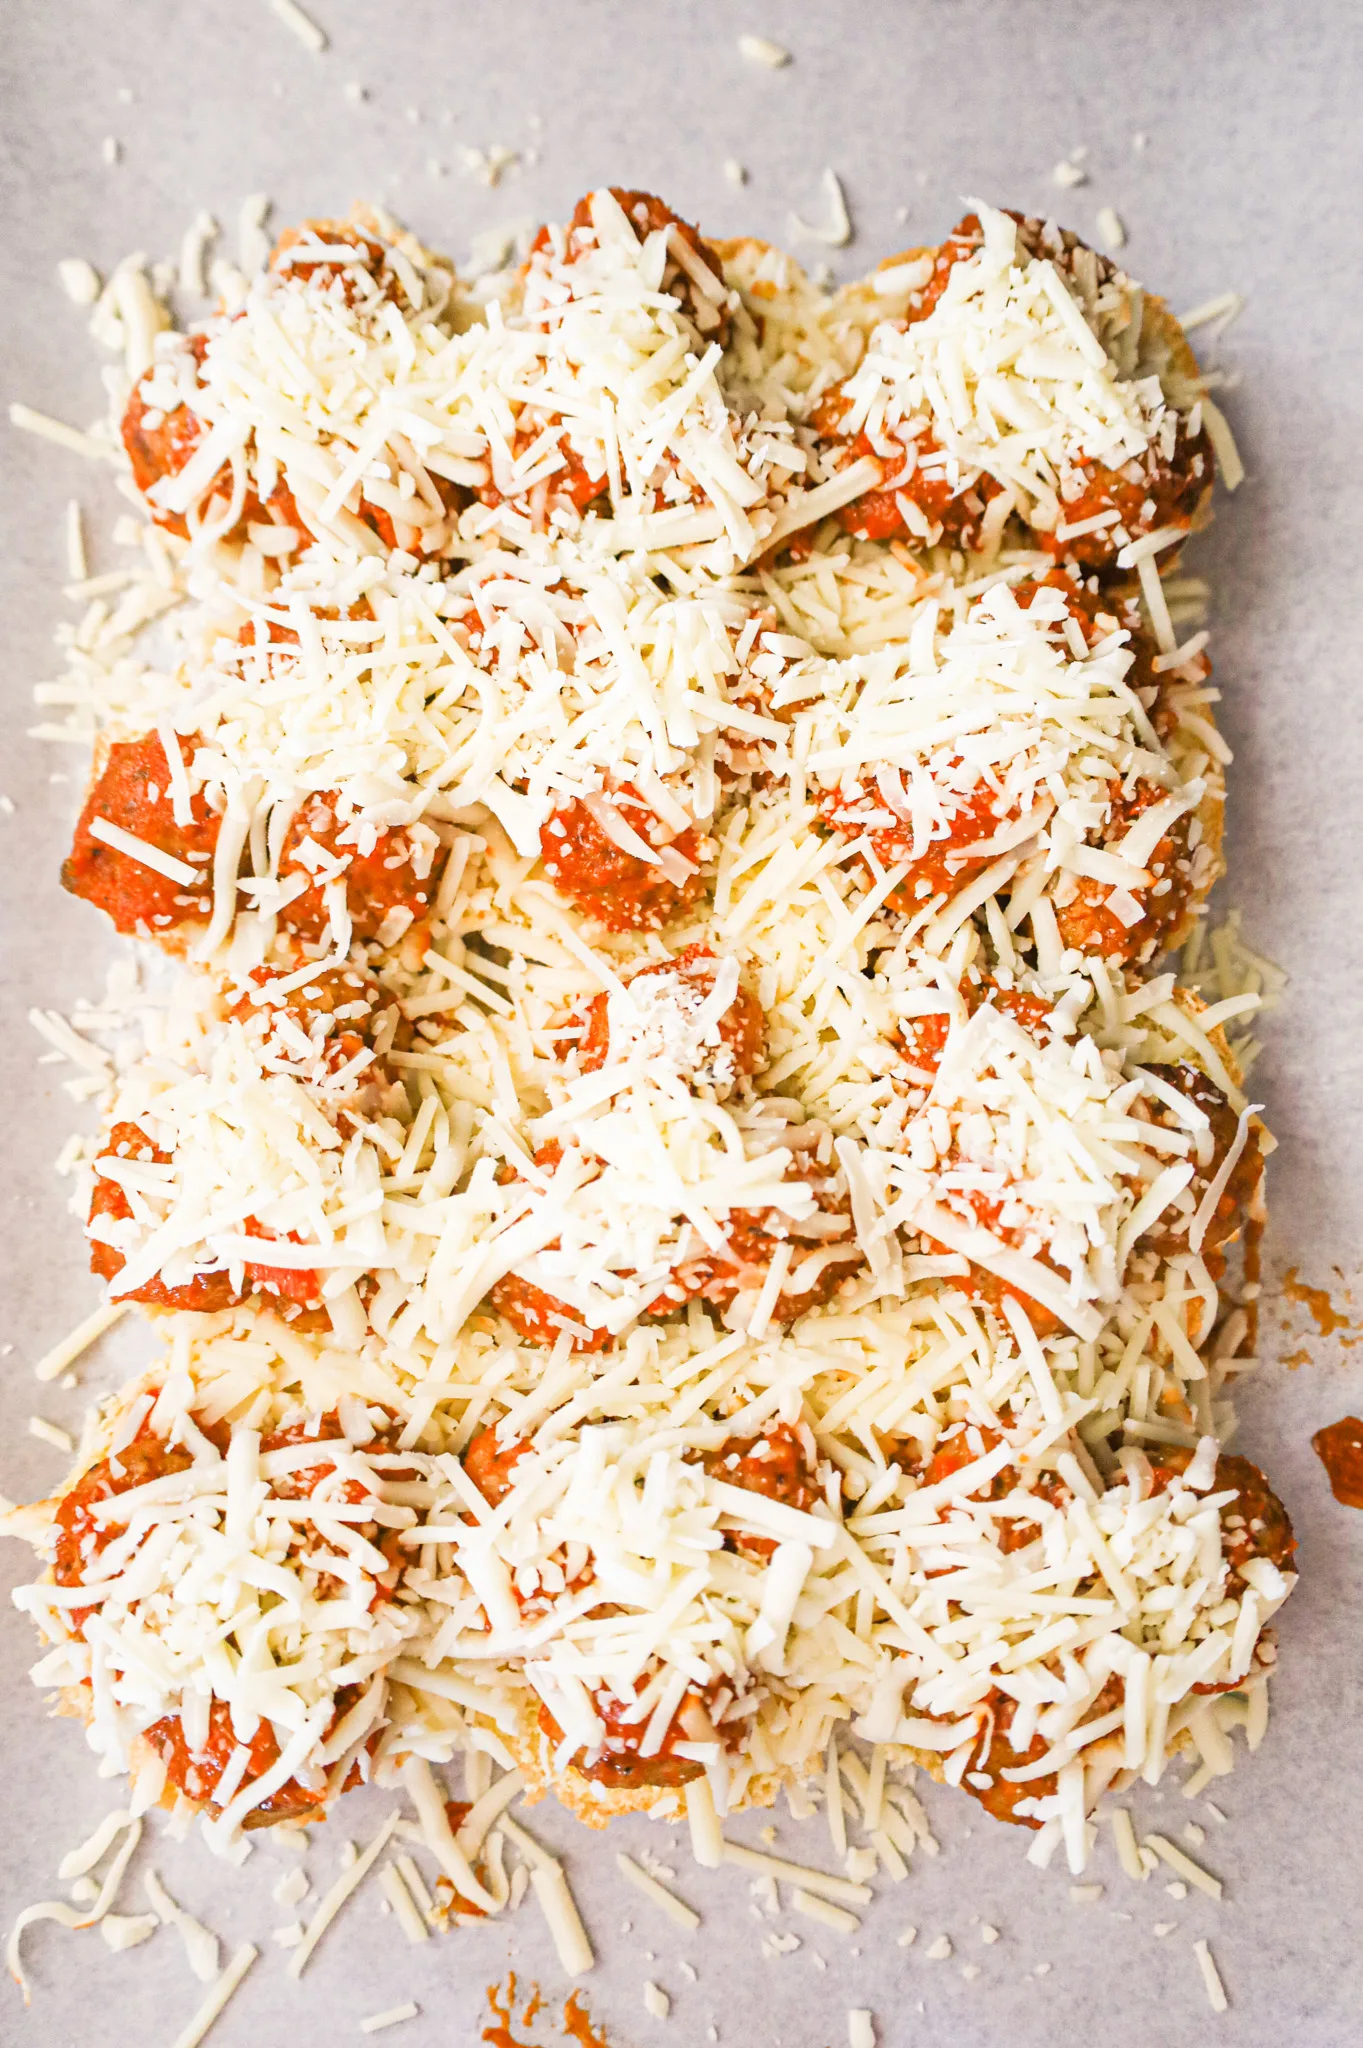 shredded cheese and meatballs on buns on a baking sheet